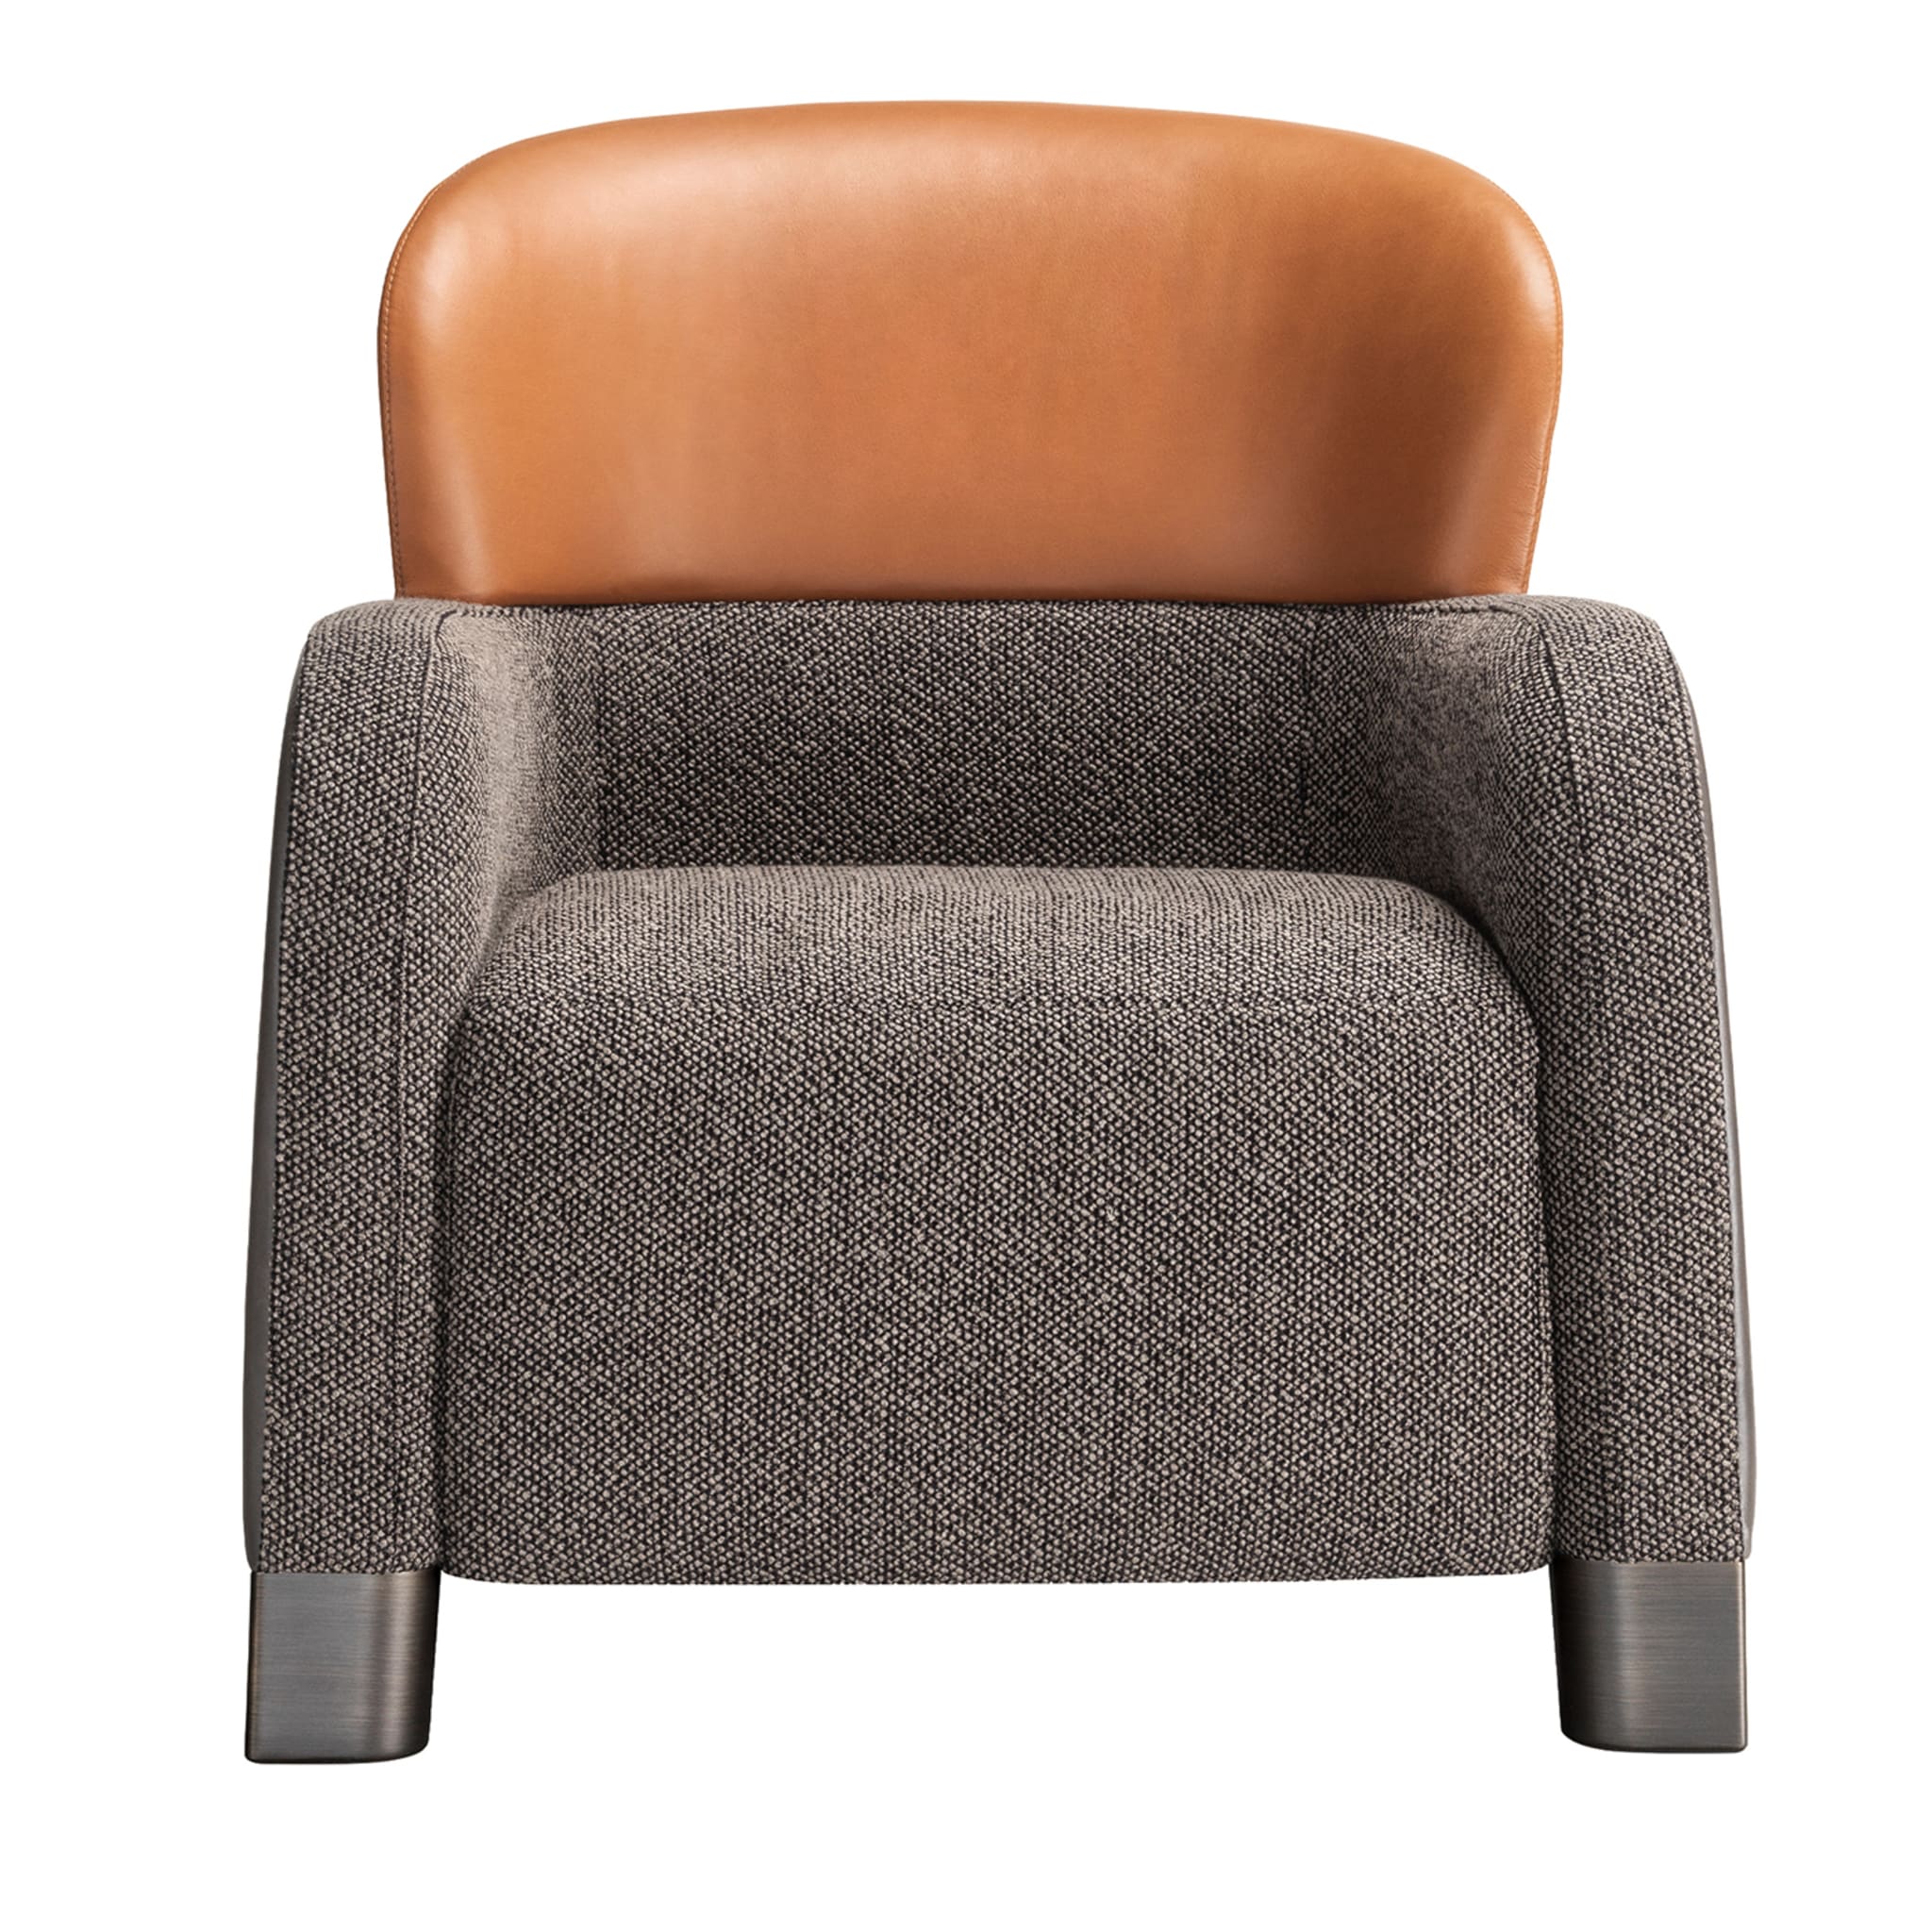 Bucket Brown/Gray Armchair with Low Headrest - Main view